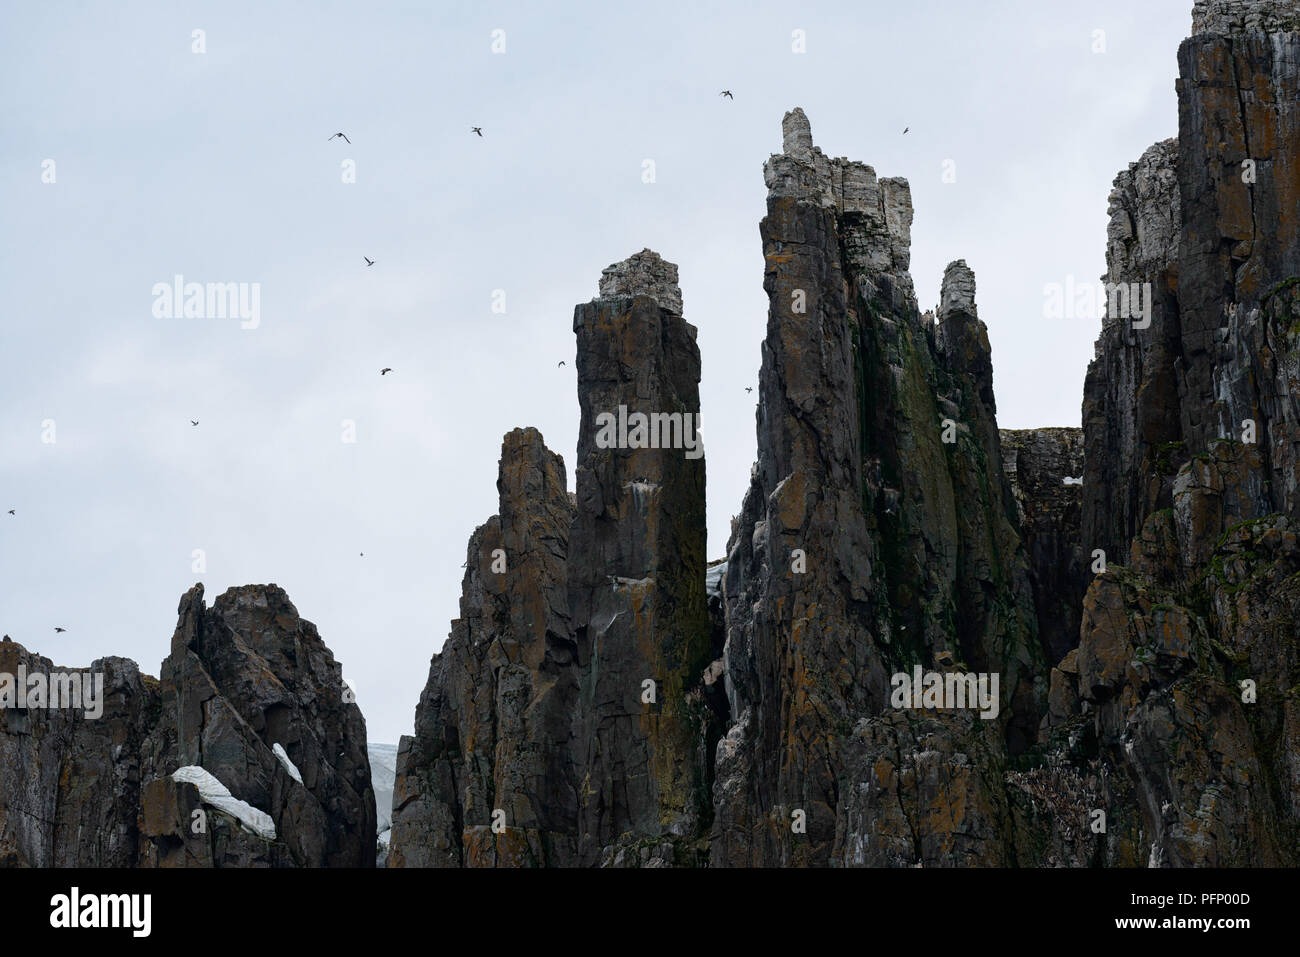 Steep cliffs with birds  at Alkefjellet, Svalbard, Norway Stock Photo